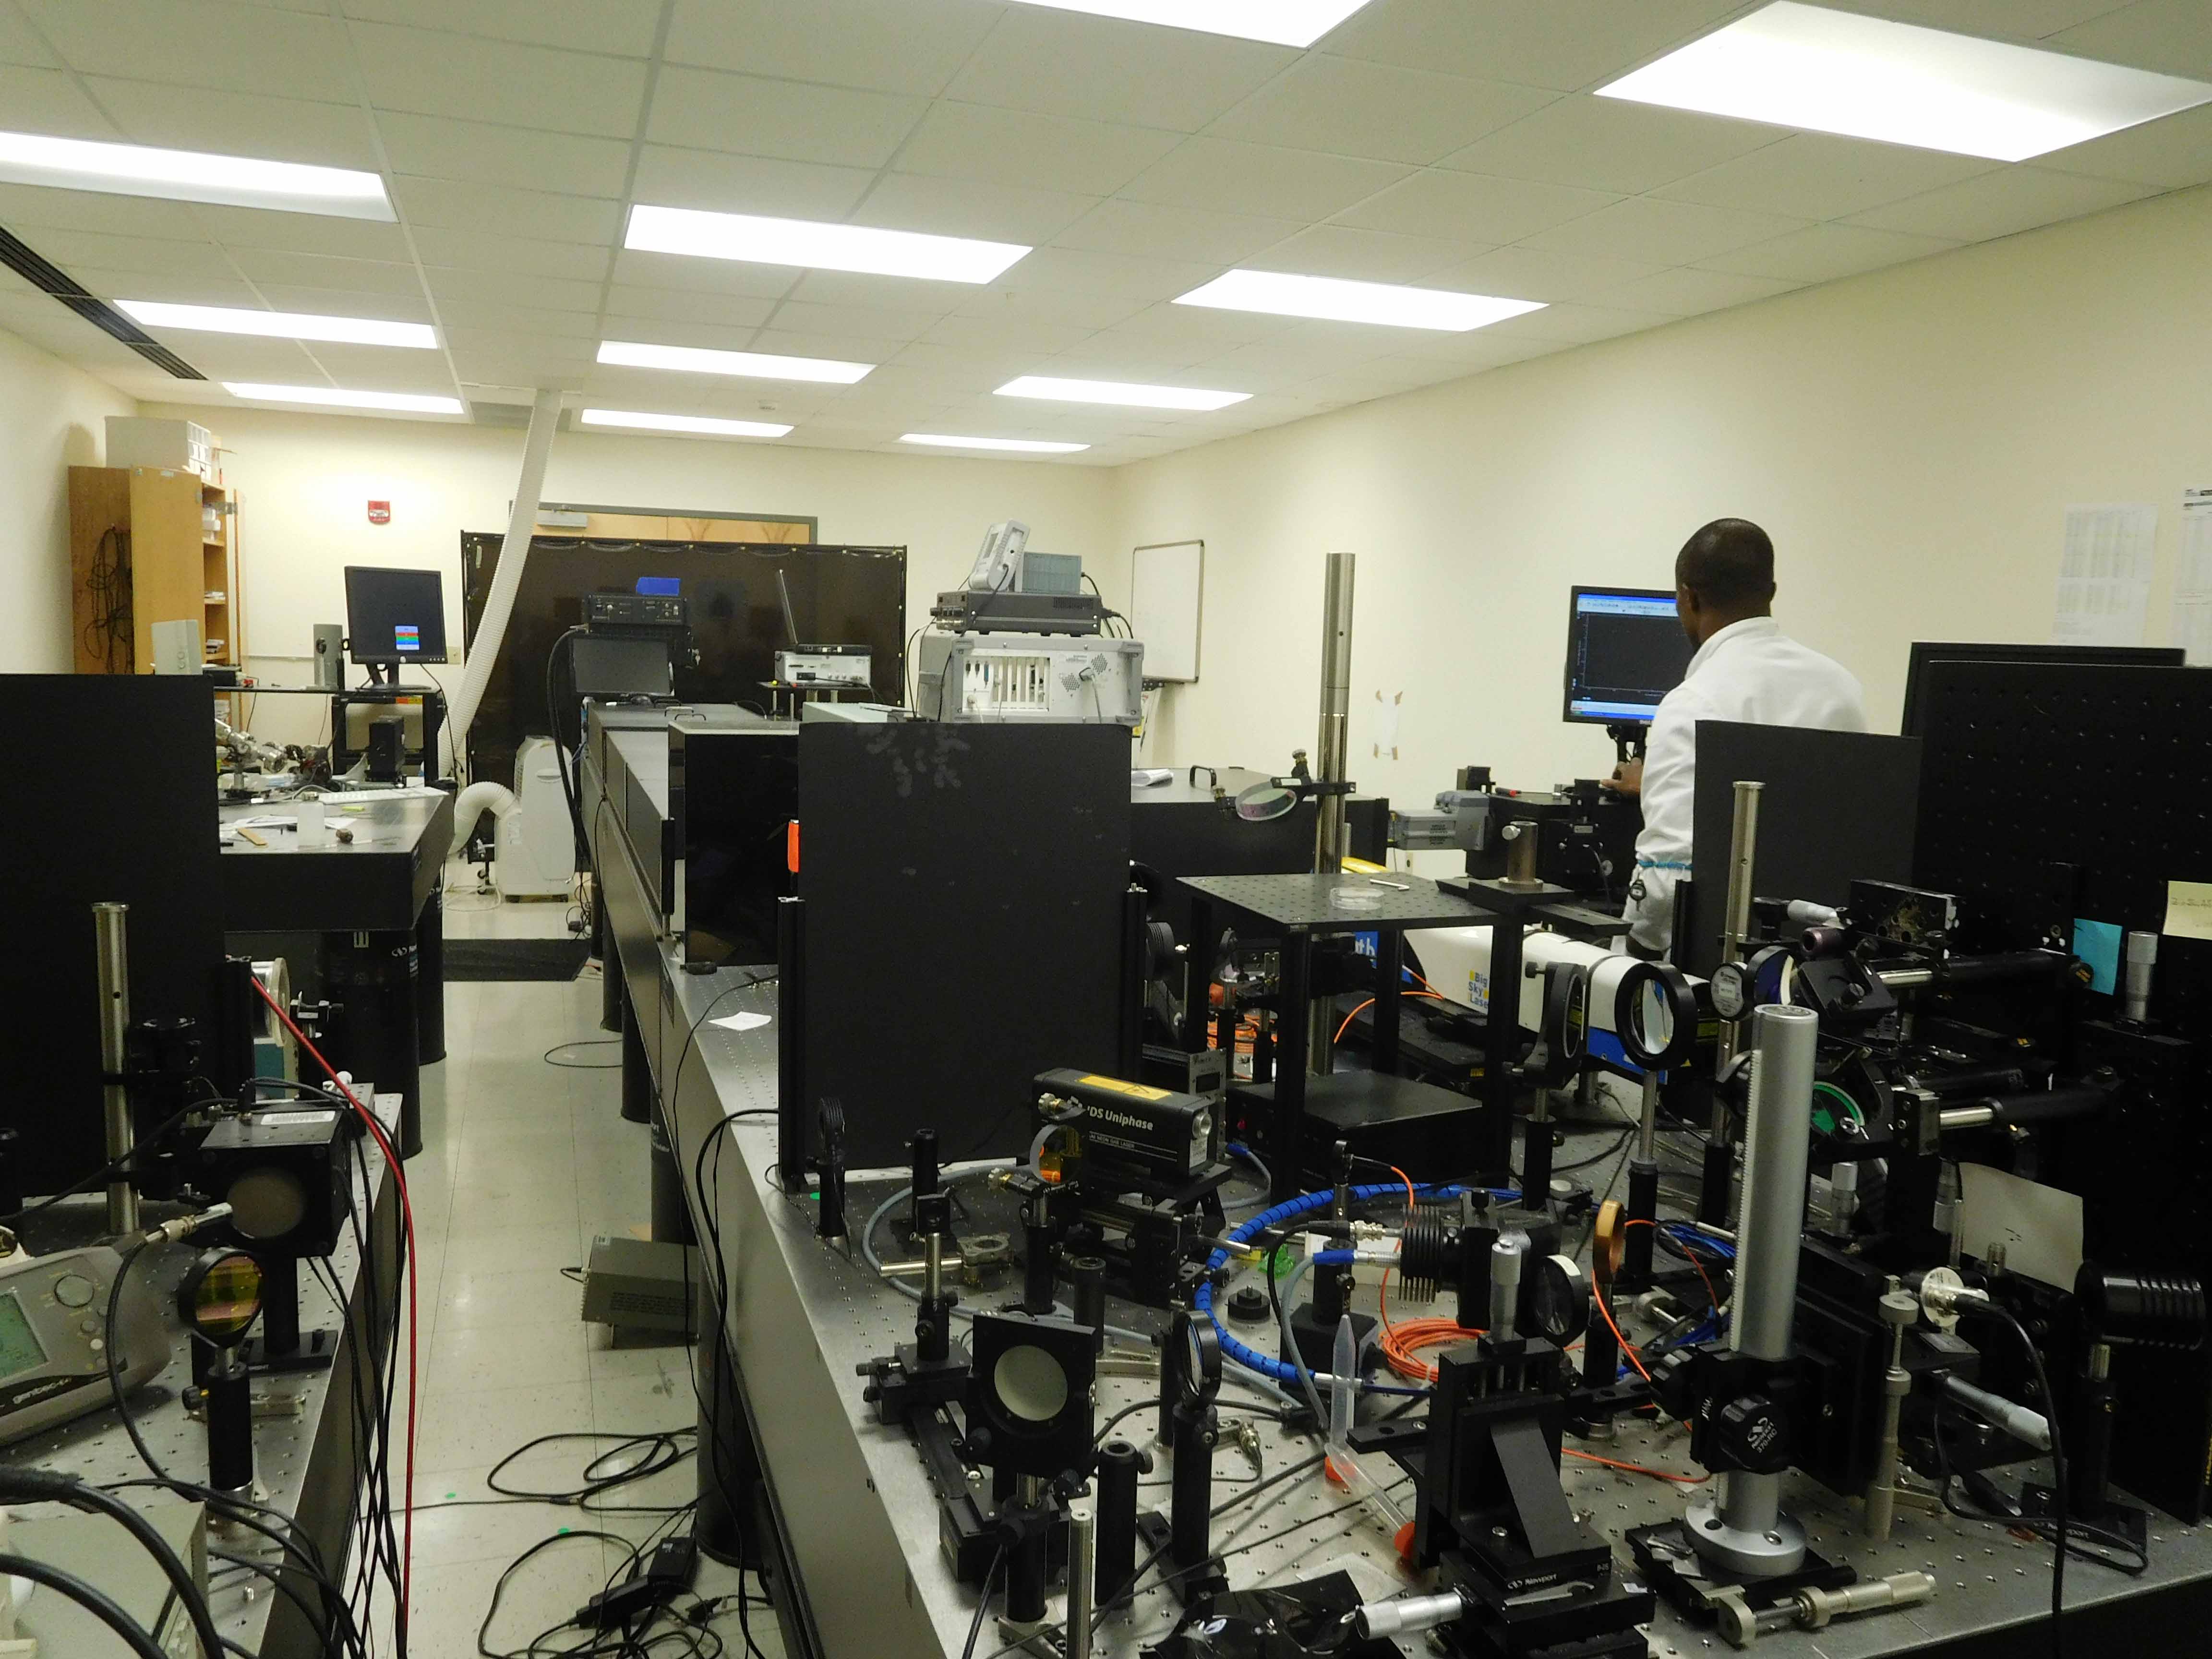 The FAMU Center for Plasma Science and Technology hard at work with lasers